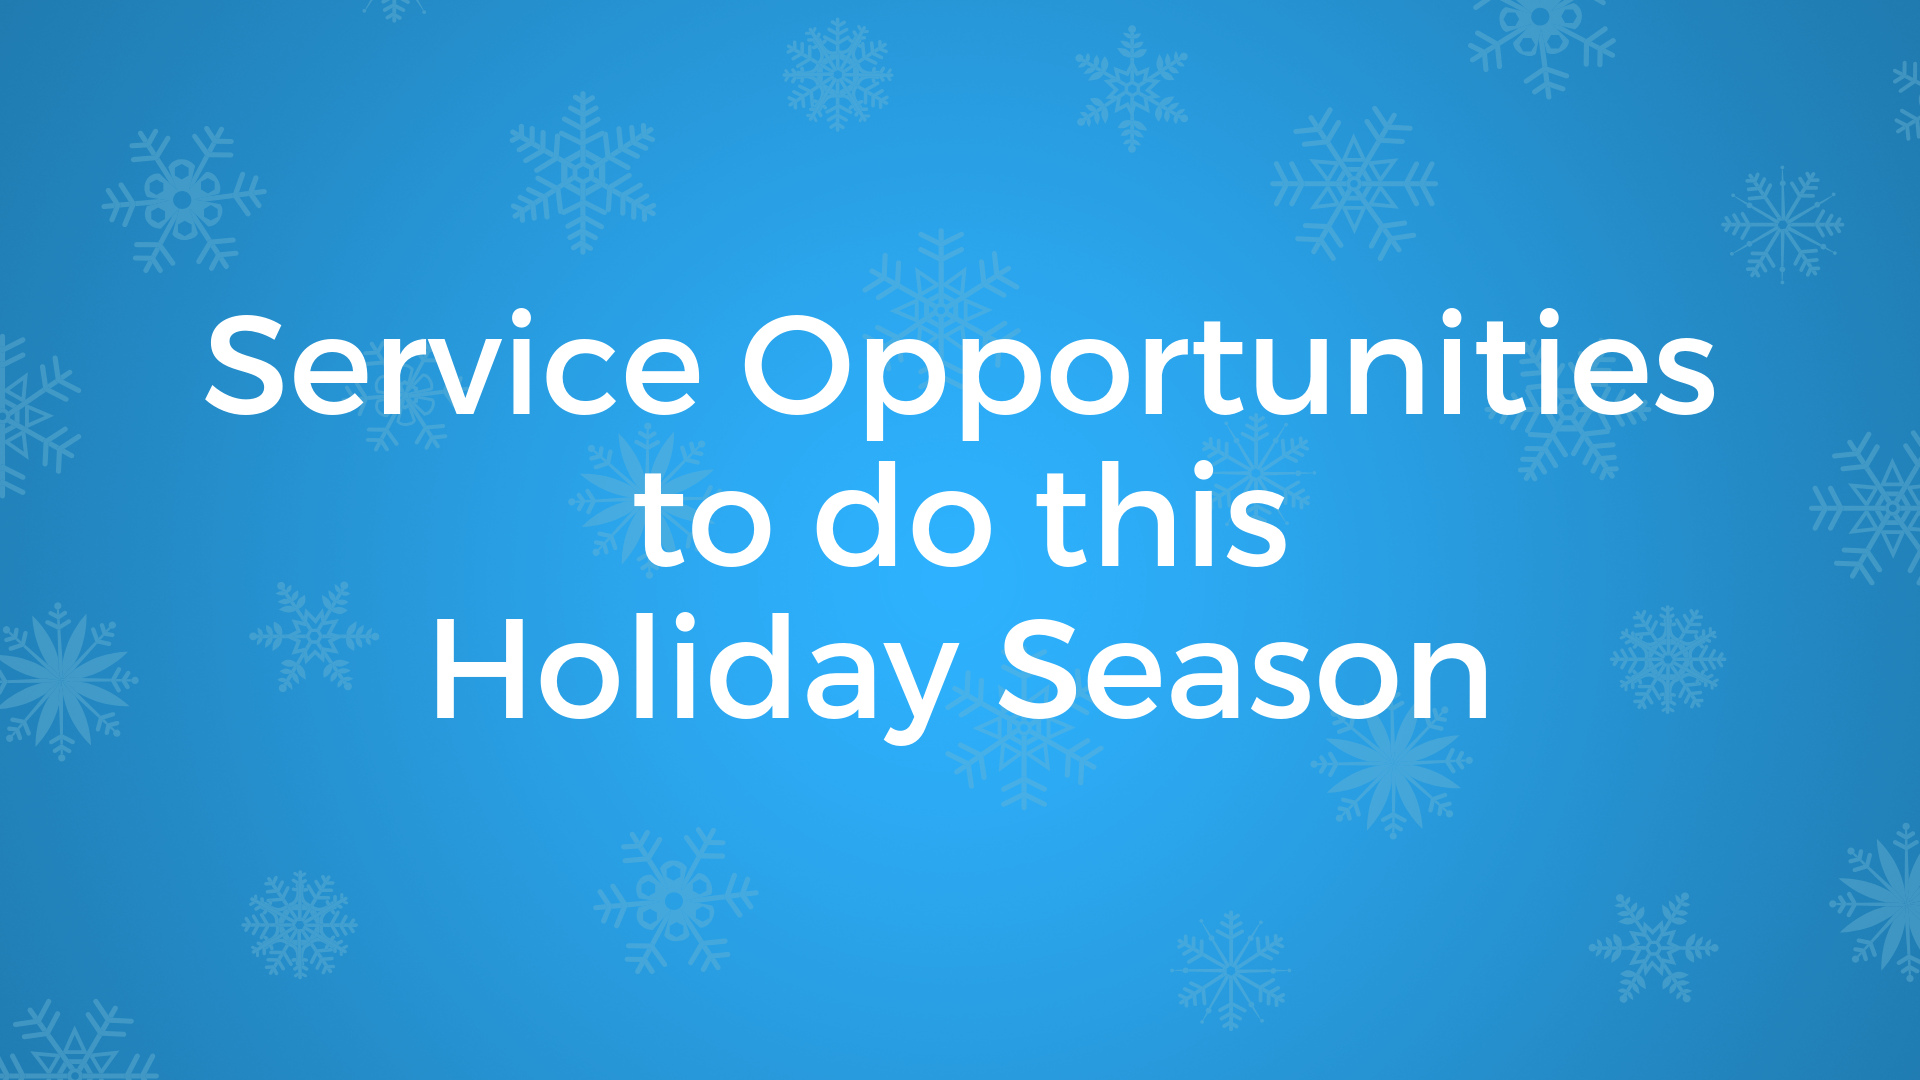 Service Opportunities to do this Holiday Season